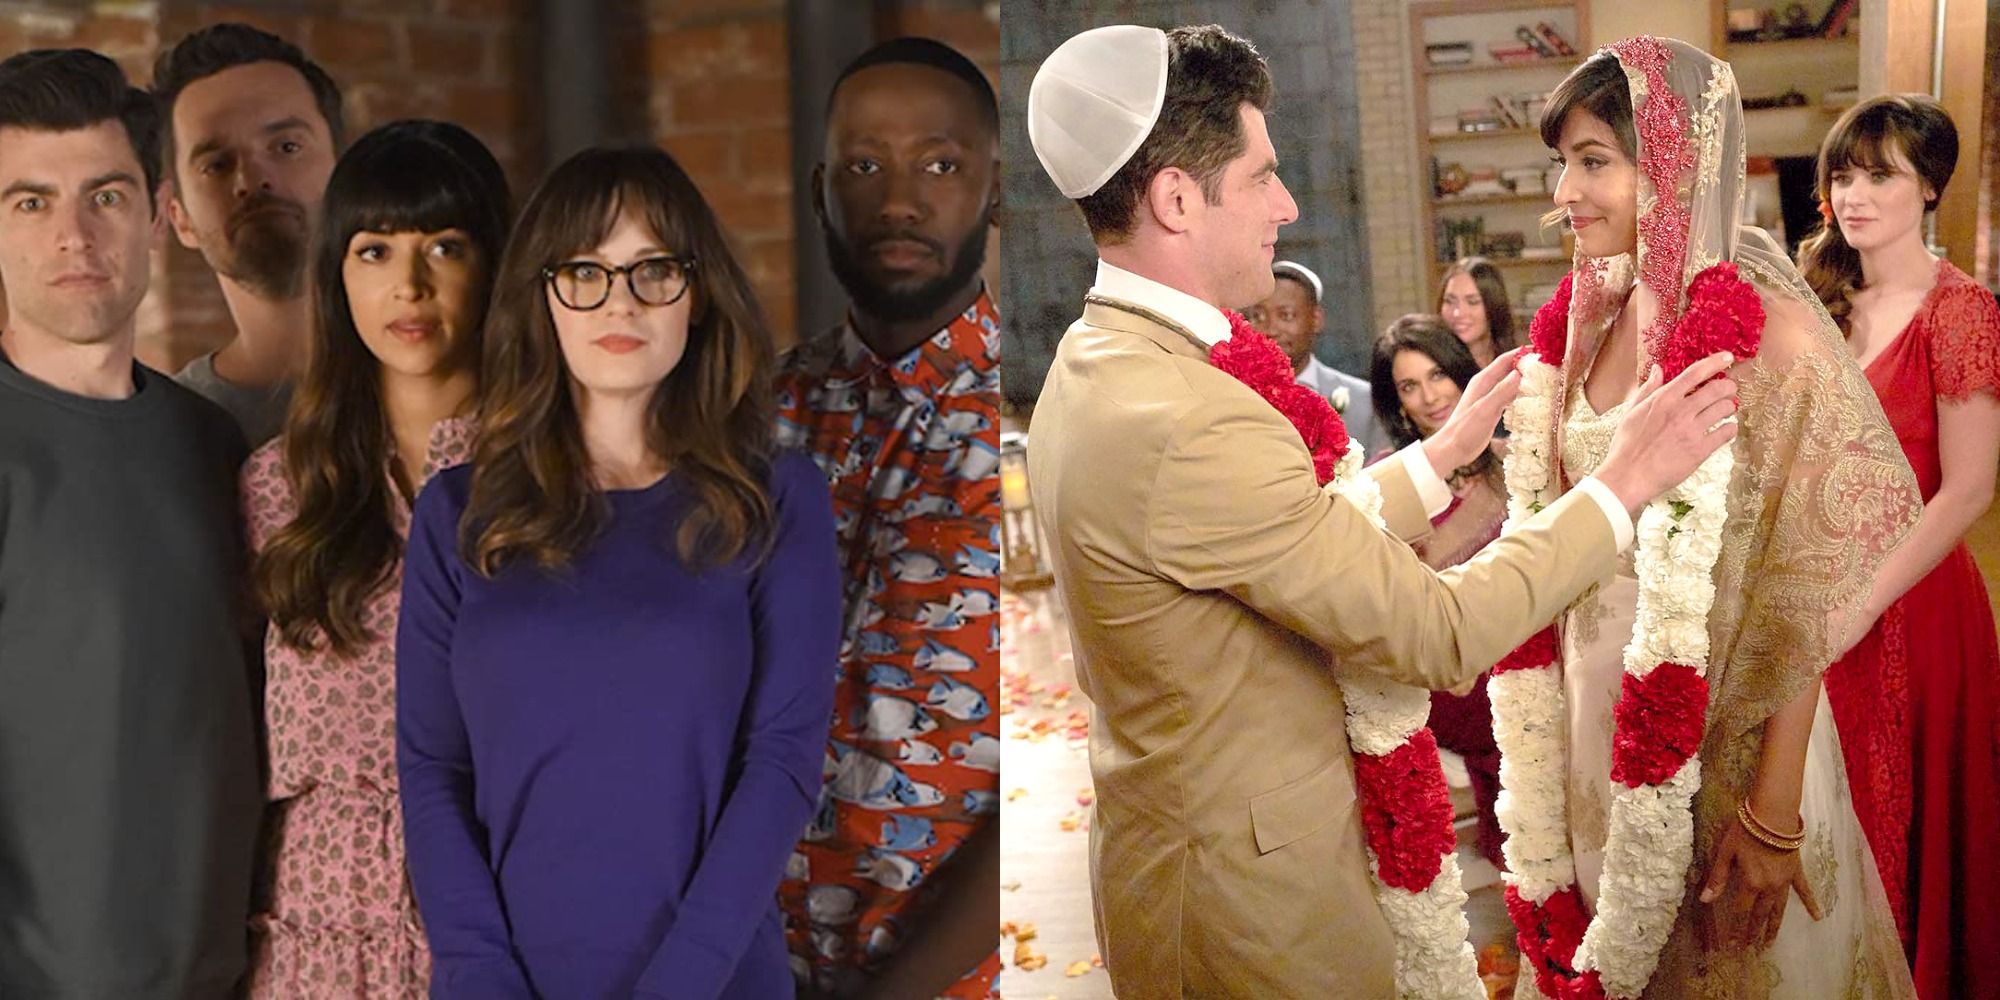 Split image showing the cast of New Girl and Schmidt and Cece's wedding